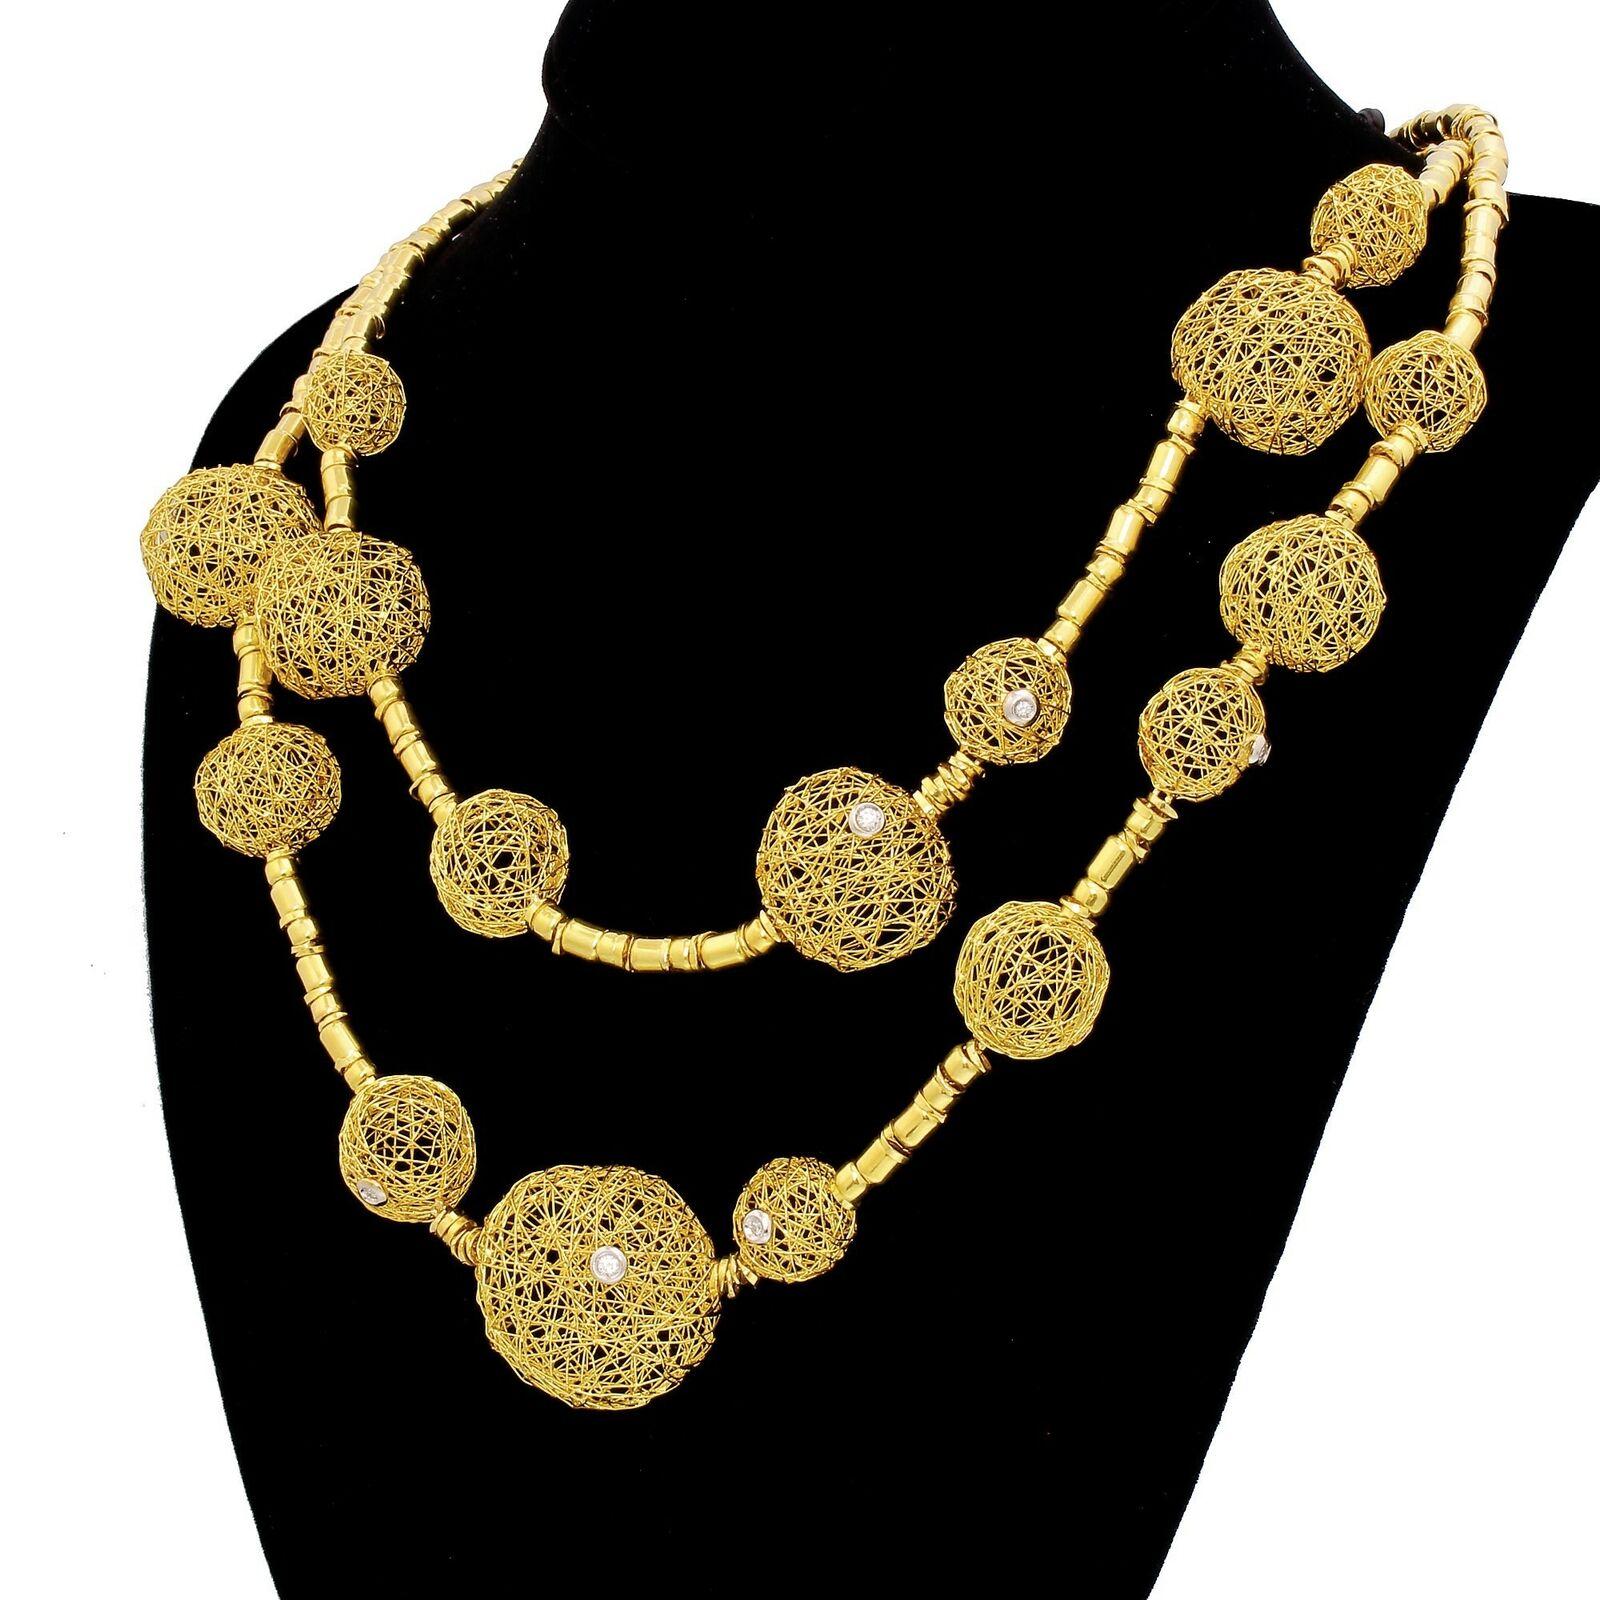 Modernist Couture Orlando Orlandini 18kt Gold Diamond Lace Sphere Necklace Double Row 76G